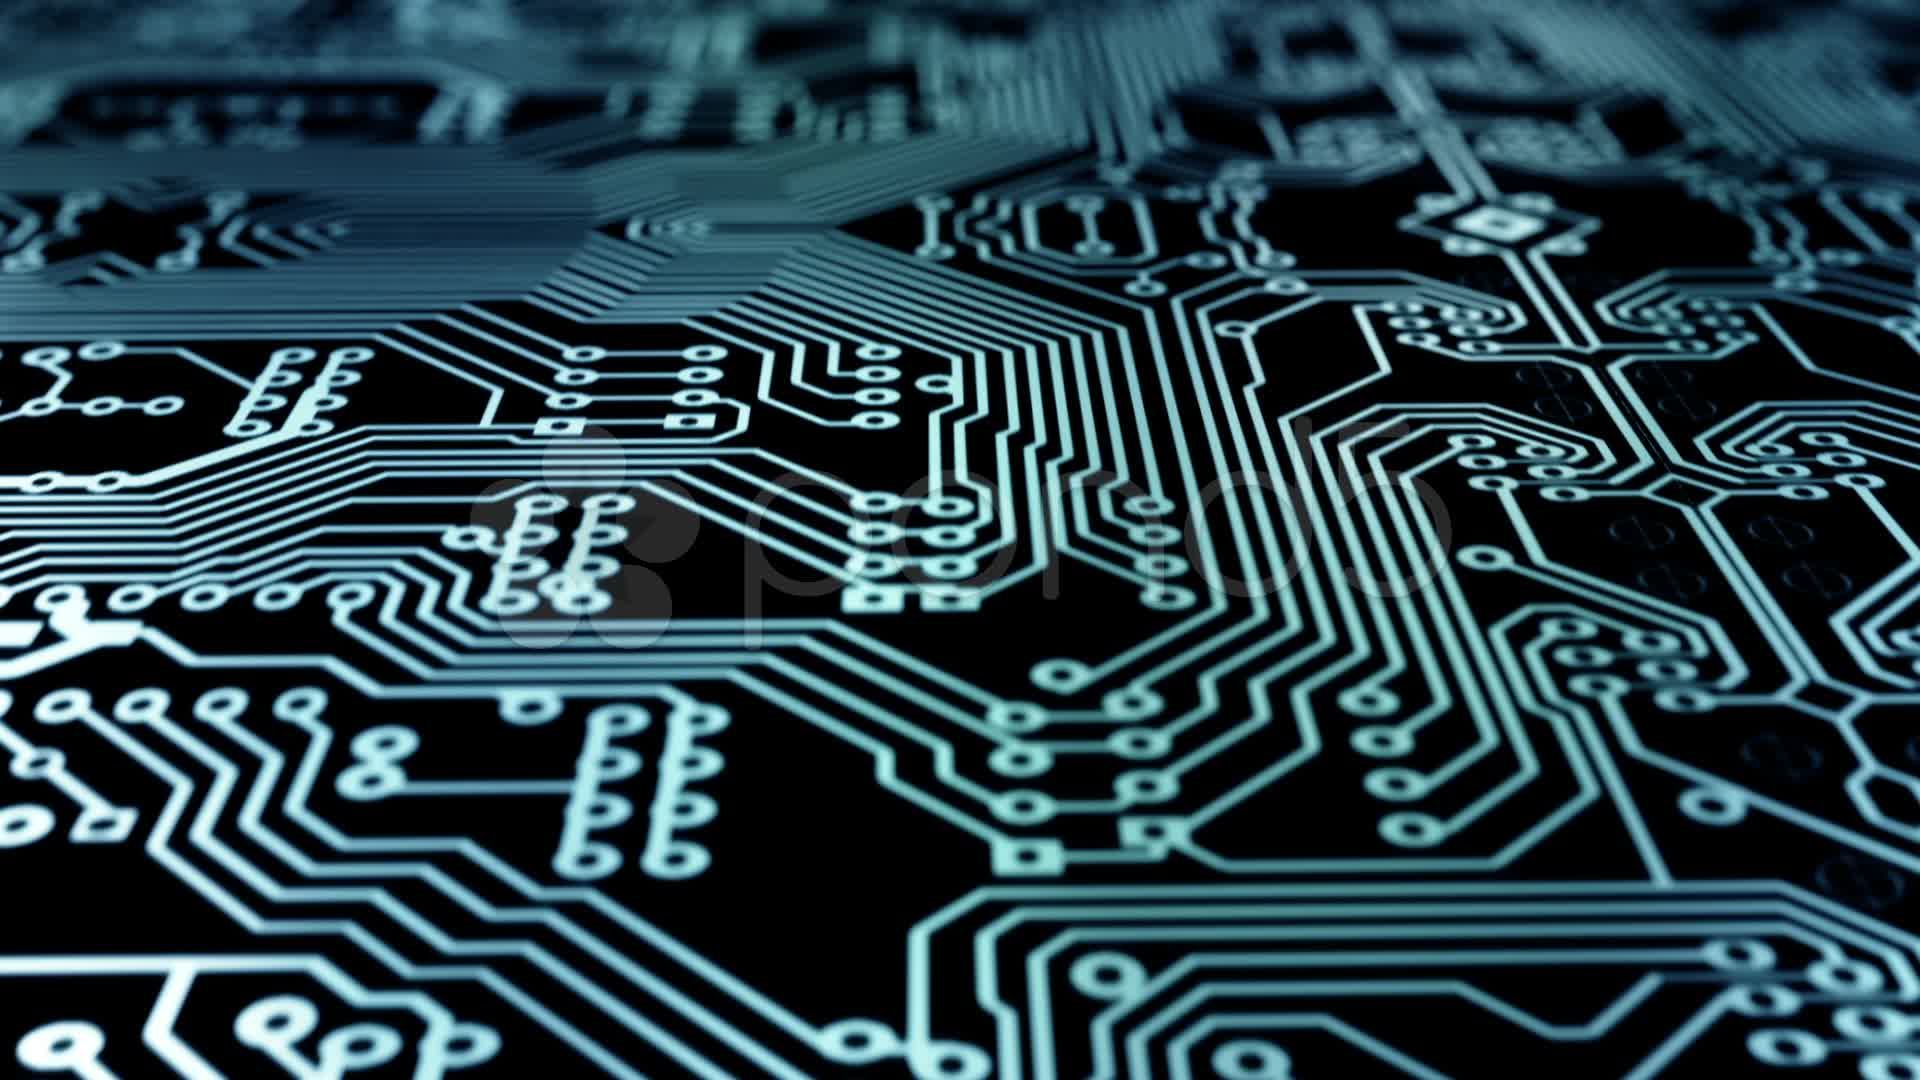 Printed Circuit Boards (PCBs) Market Analysis, Key Players, Share Dynamic Demand and Consumption to 2032